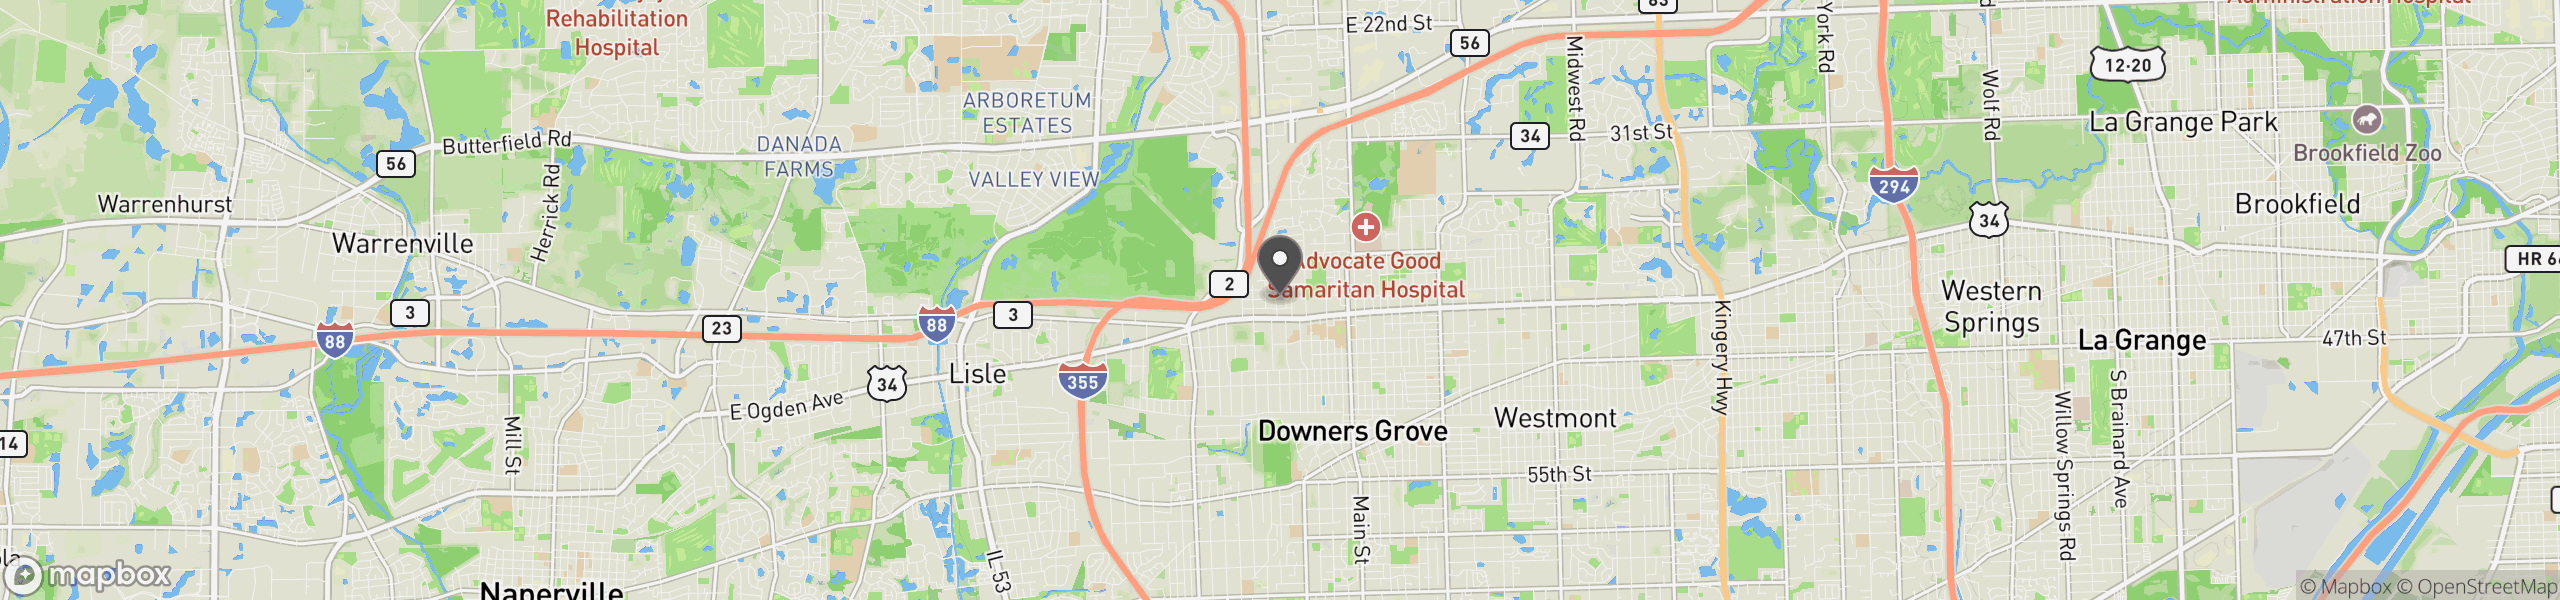 Downers Grove, IL